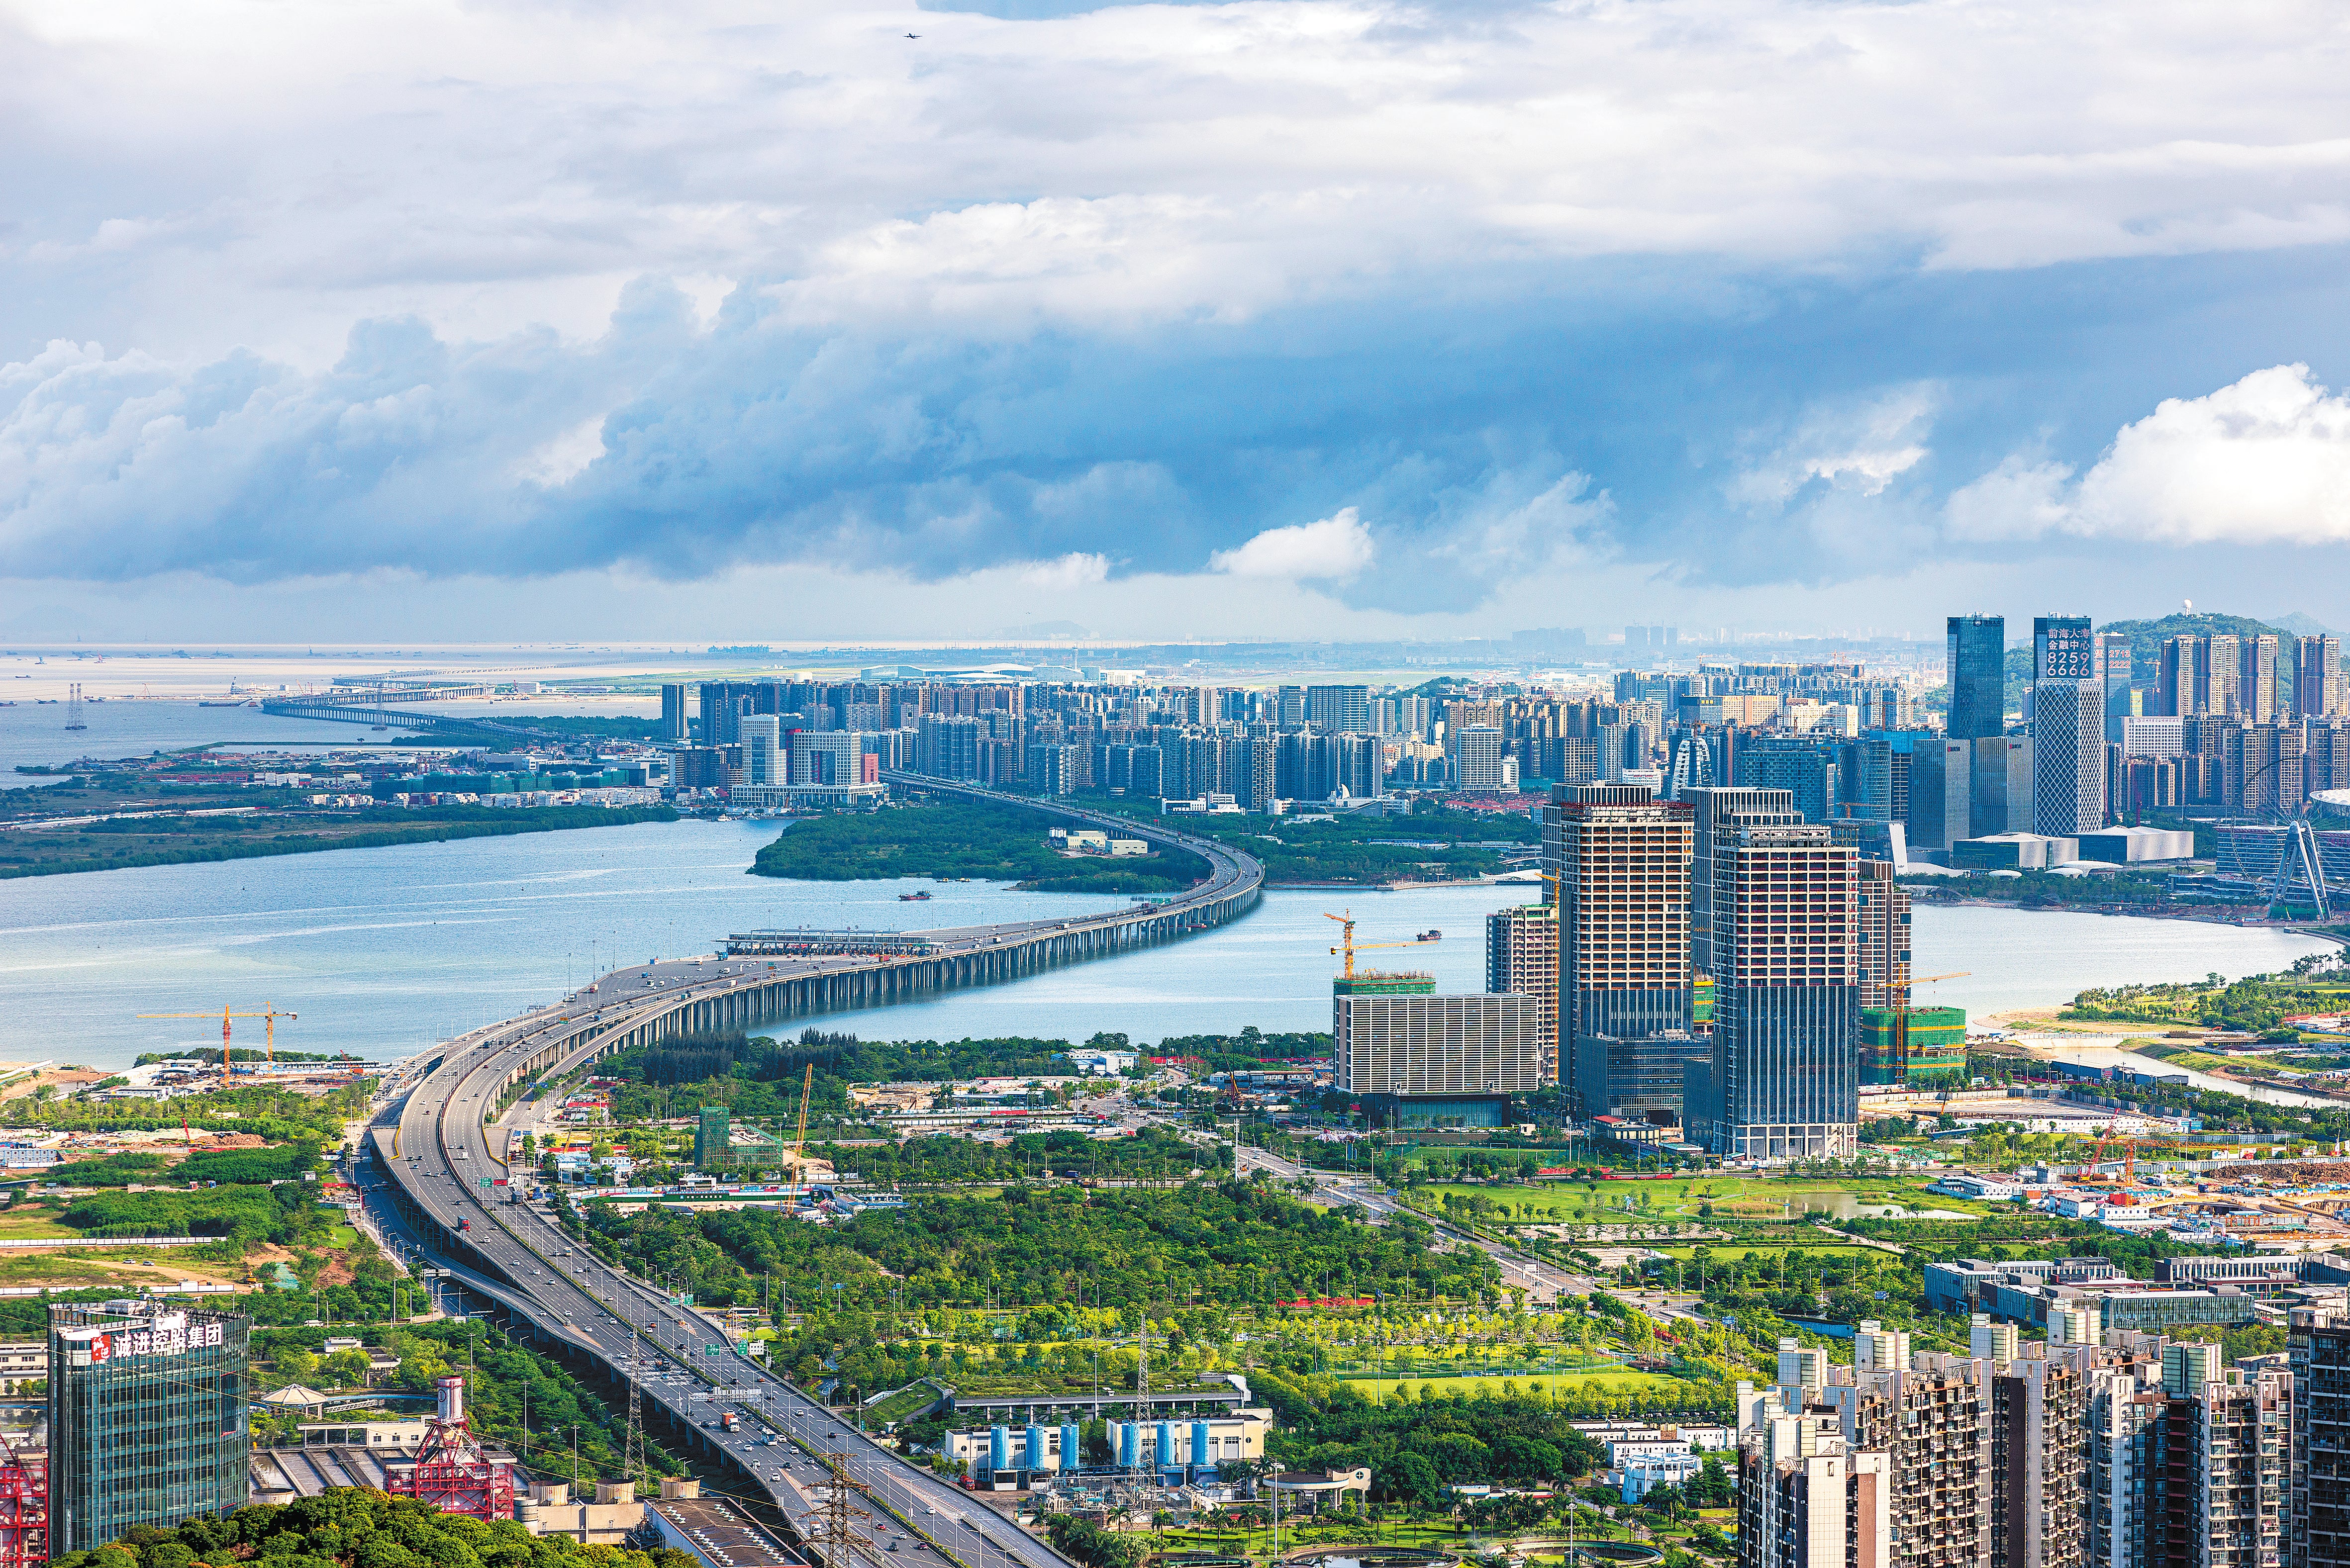 The Qianhai Special Economic Zone was established in Shenzhen, Guangdong province, in 2015 to deepen cooperation between the city and Hong Kong